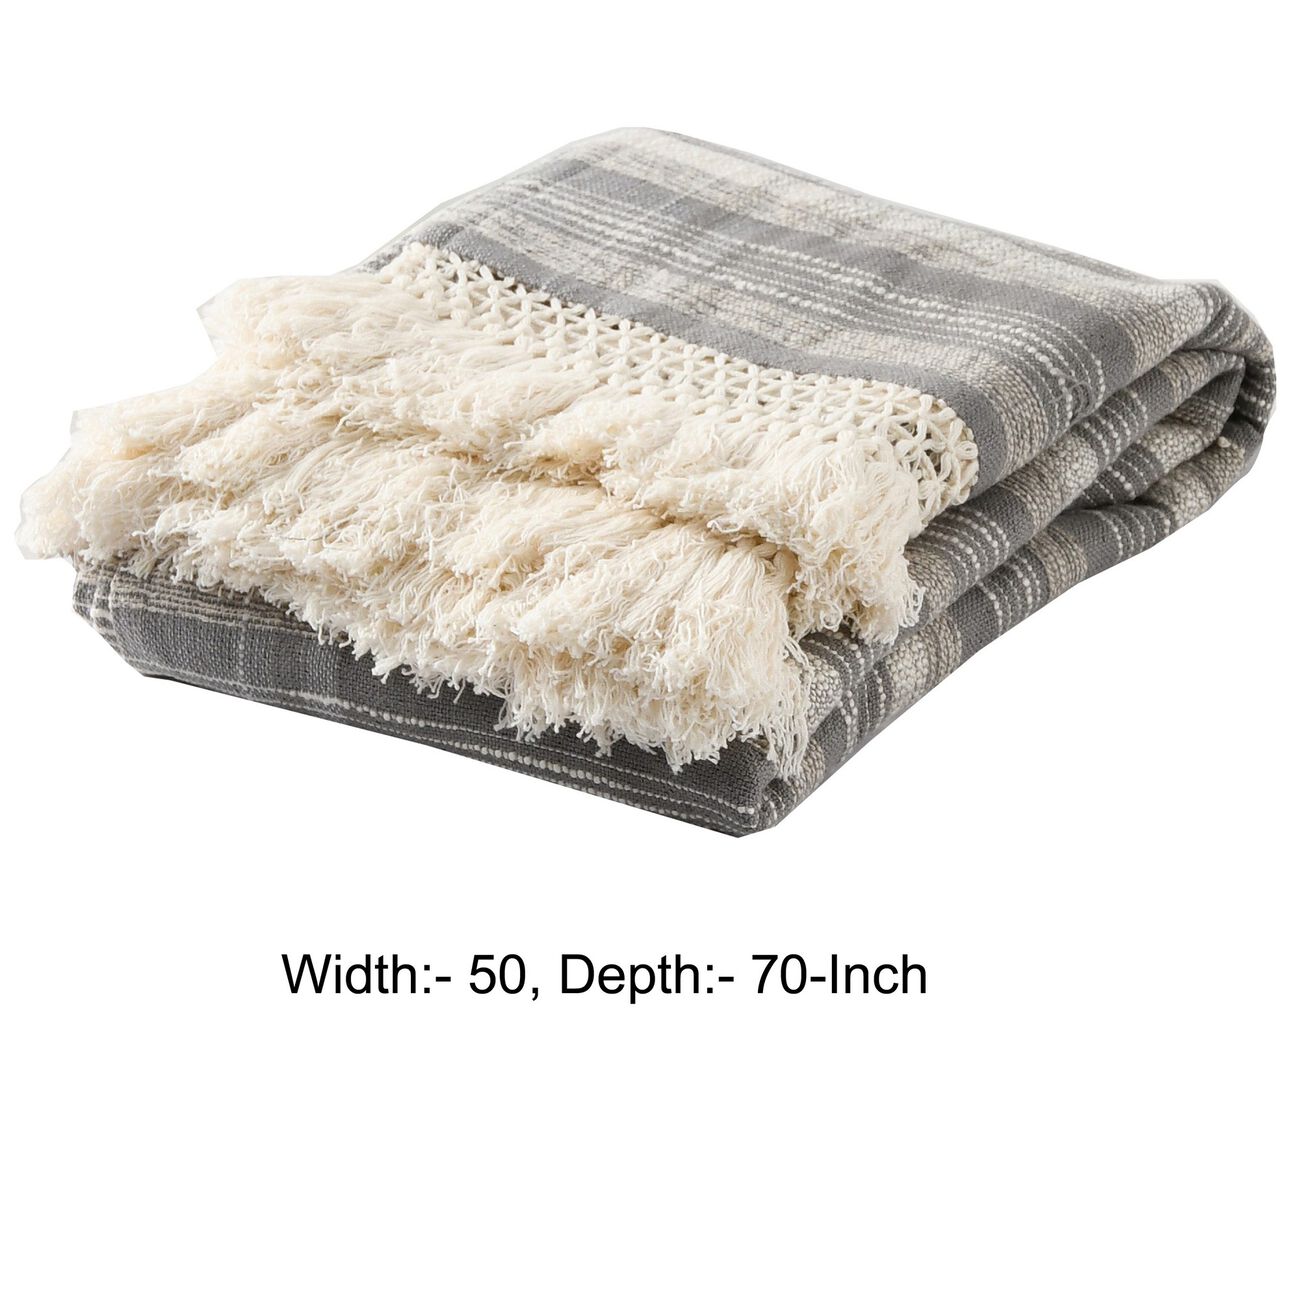 Fabric Throw with Fringe Details and Plaid Pattern, Gray and Cream